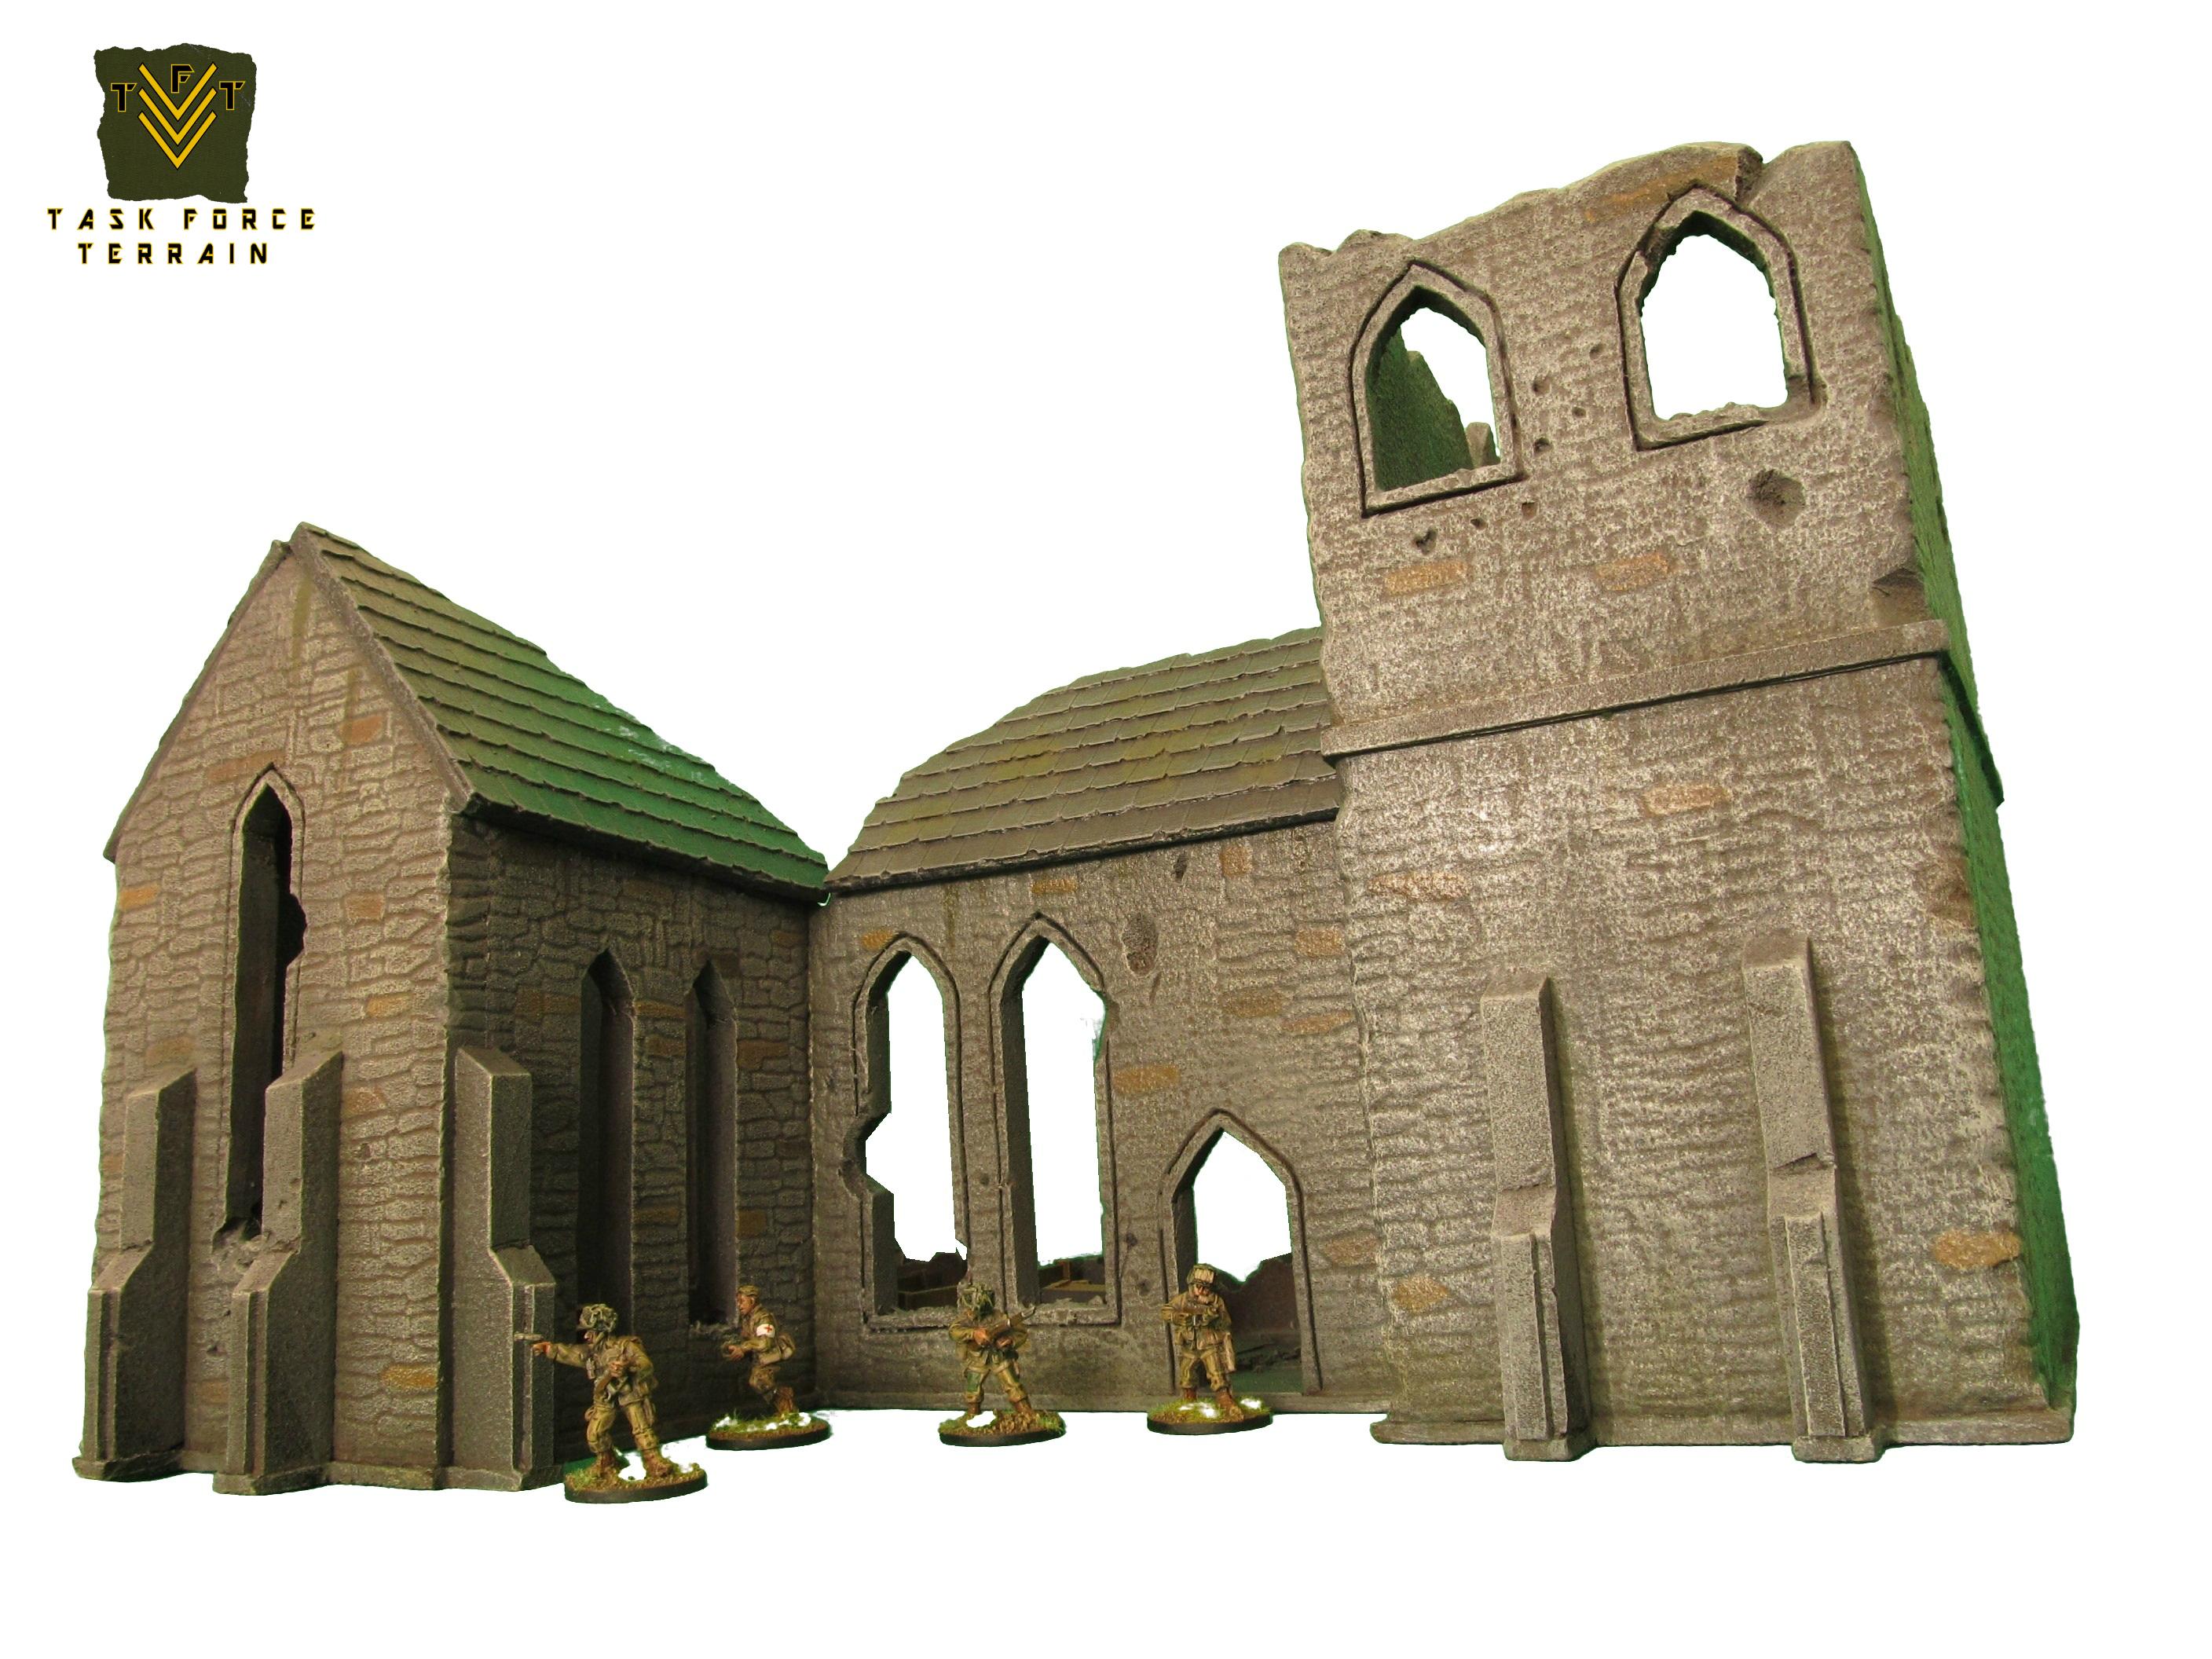 28mm, 28mm Ww2 Buildings, 28mm Ww2 Church, 28mm Ww2 Terrain, Boltaction, Buildings, Game Table, Gametable, Terrain, Wargames, World War 2, Ww2 Church, Ww2 Wargames Terrain